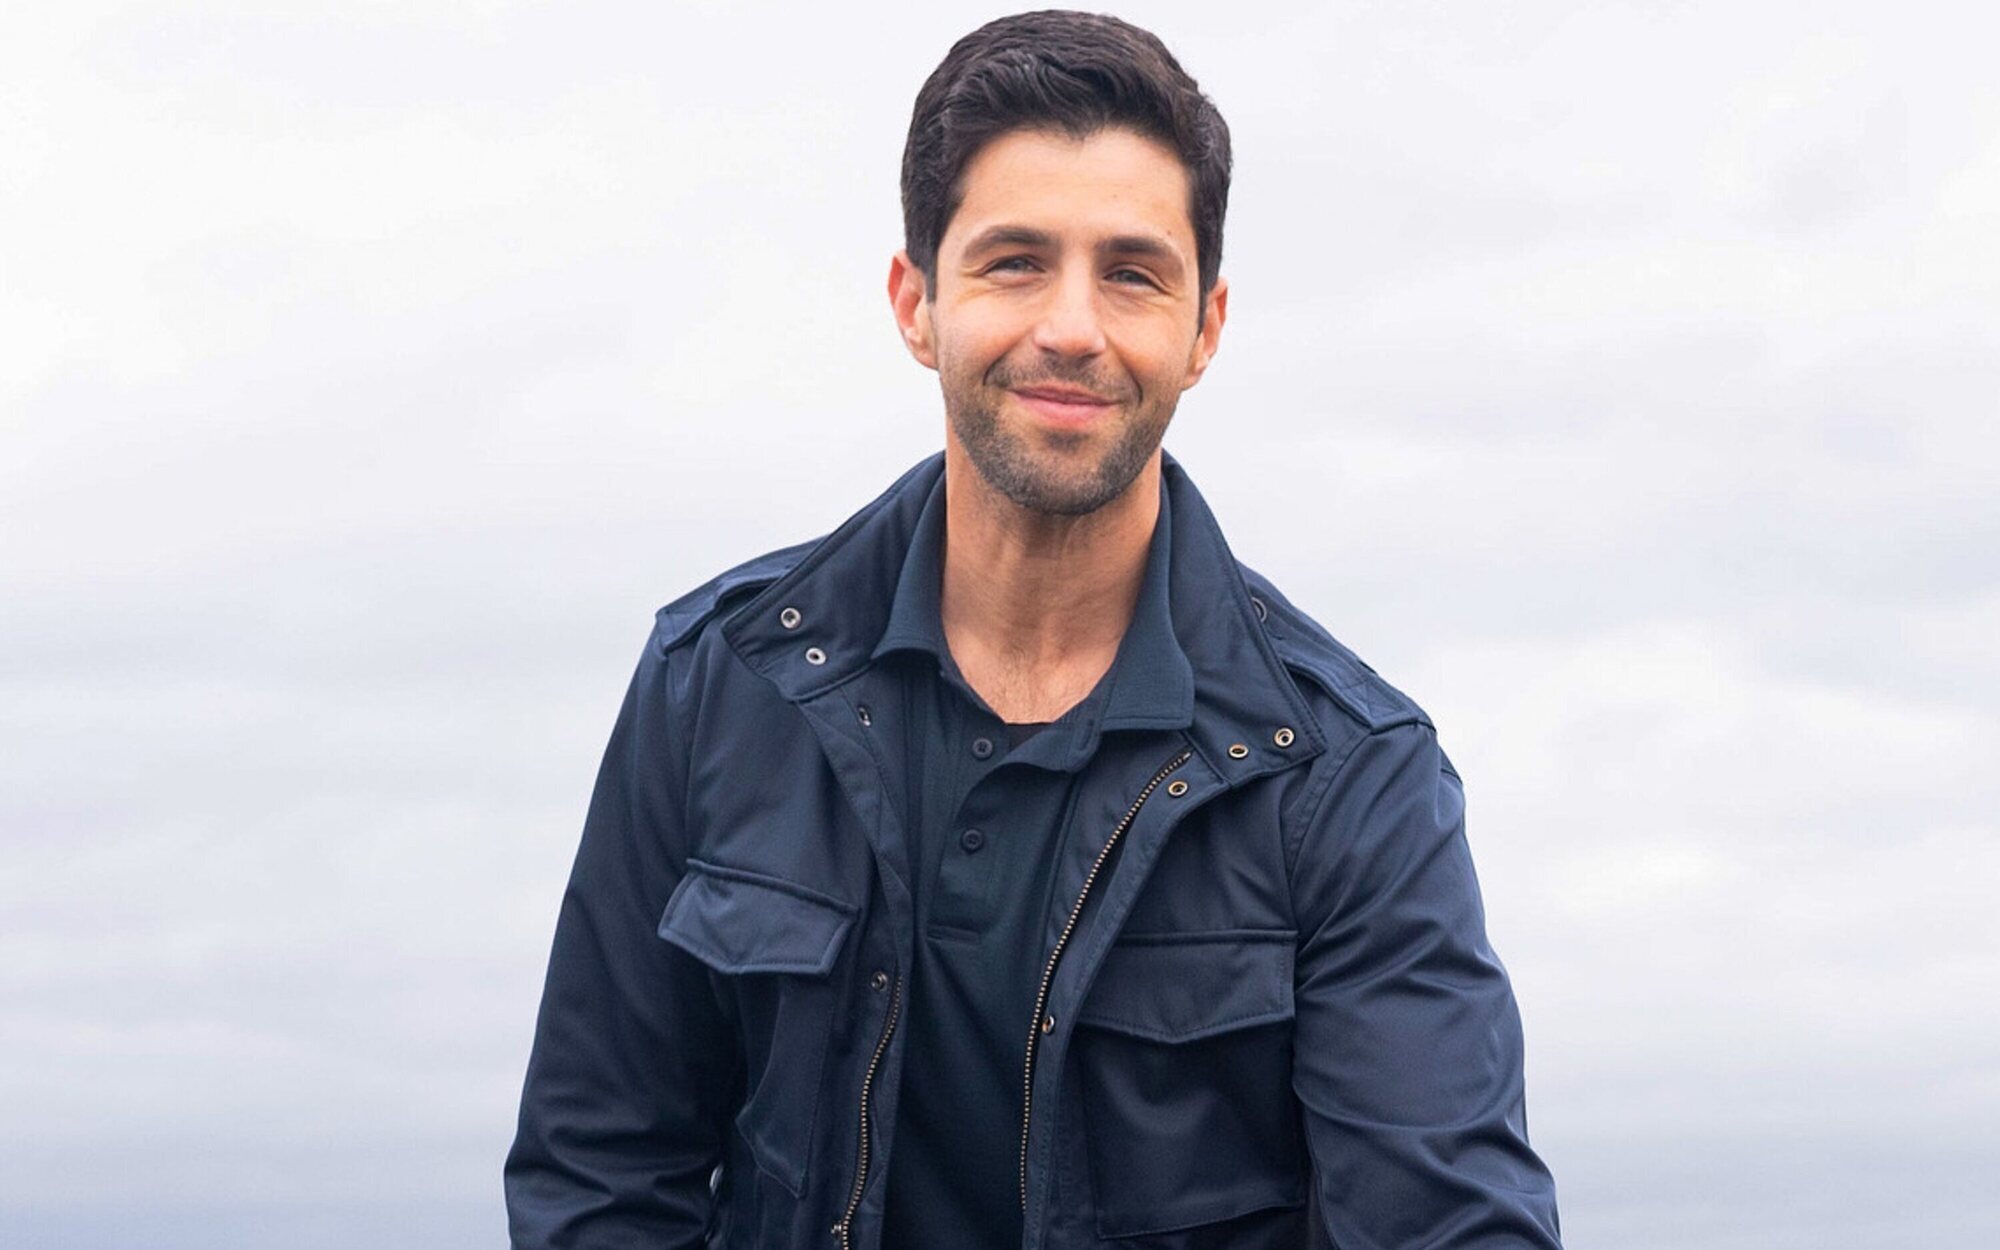 Josh Peck ('Drake & Josh') se une a 'How I Met Your Father'